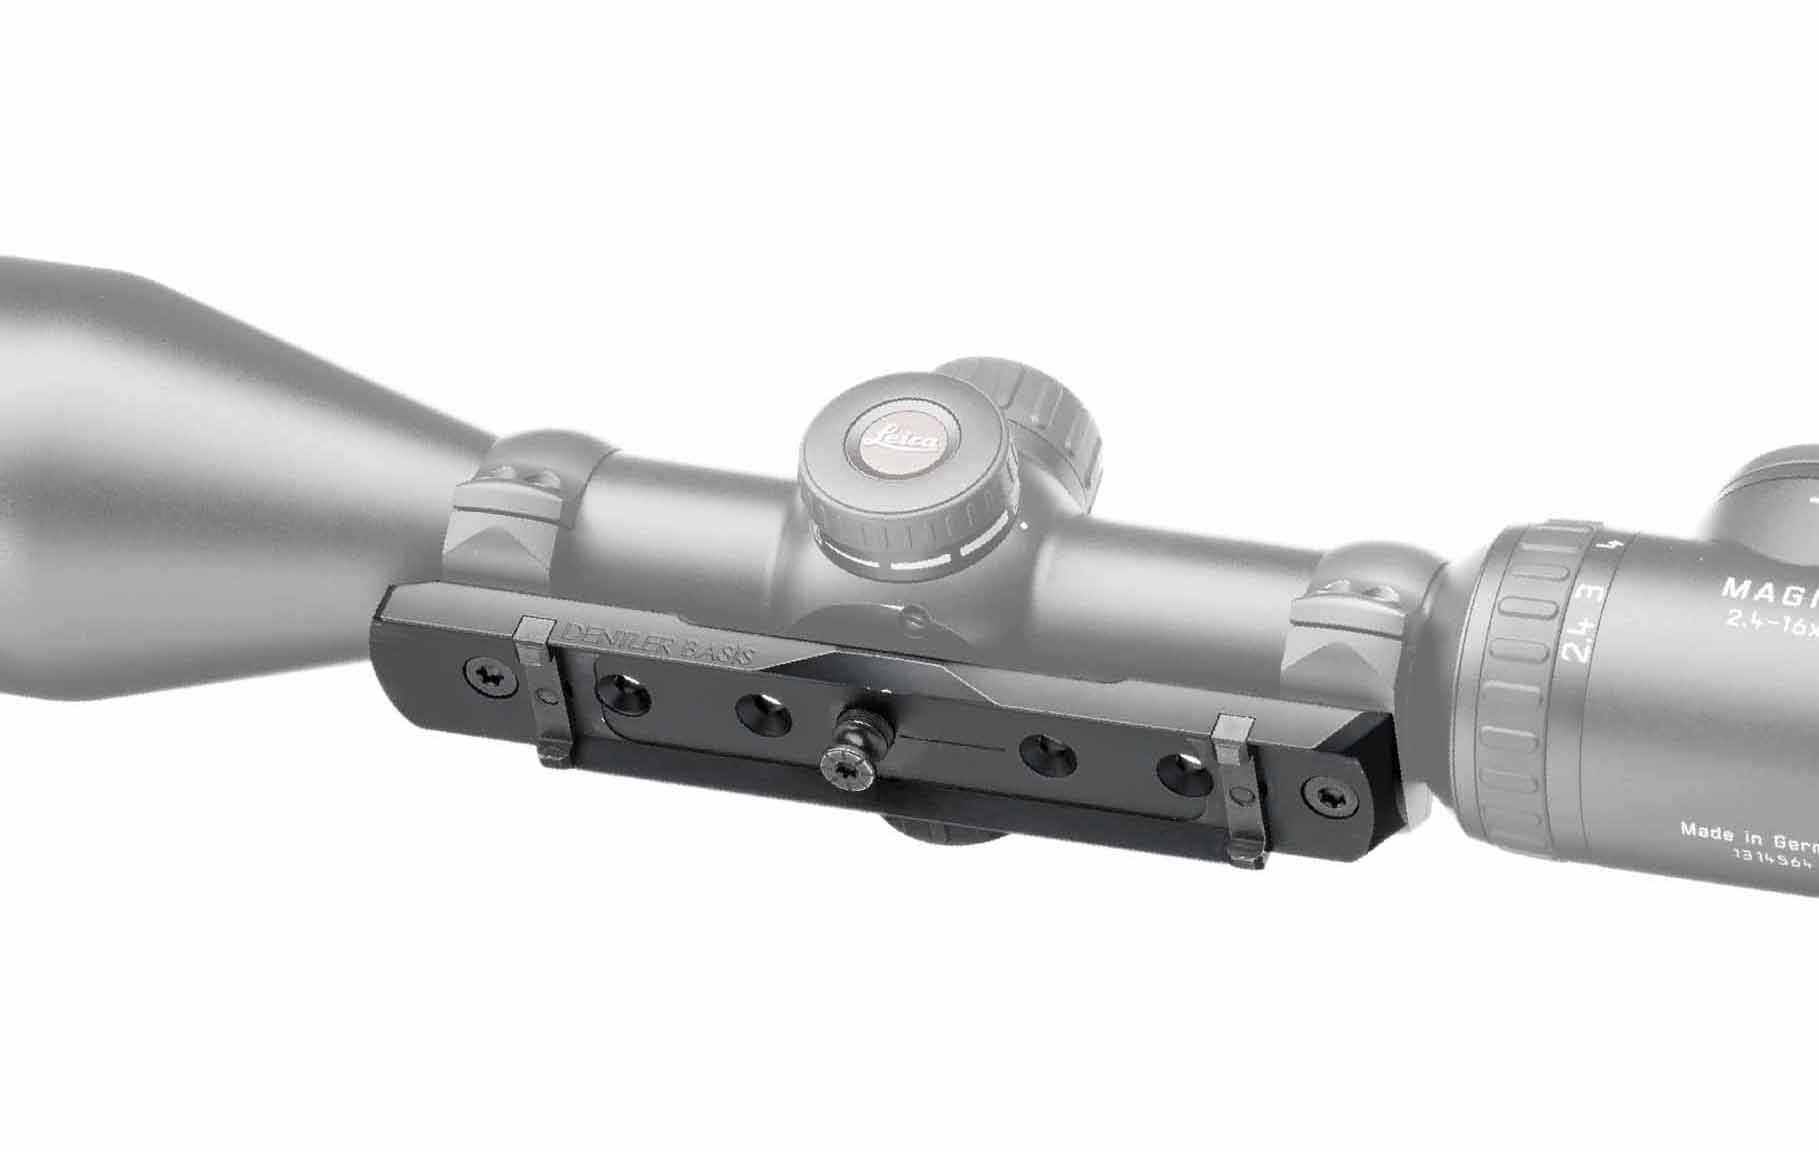 Dentler mounting rail BASIS - Aimpoint Micro H1 (Stahl)